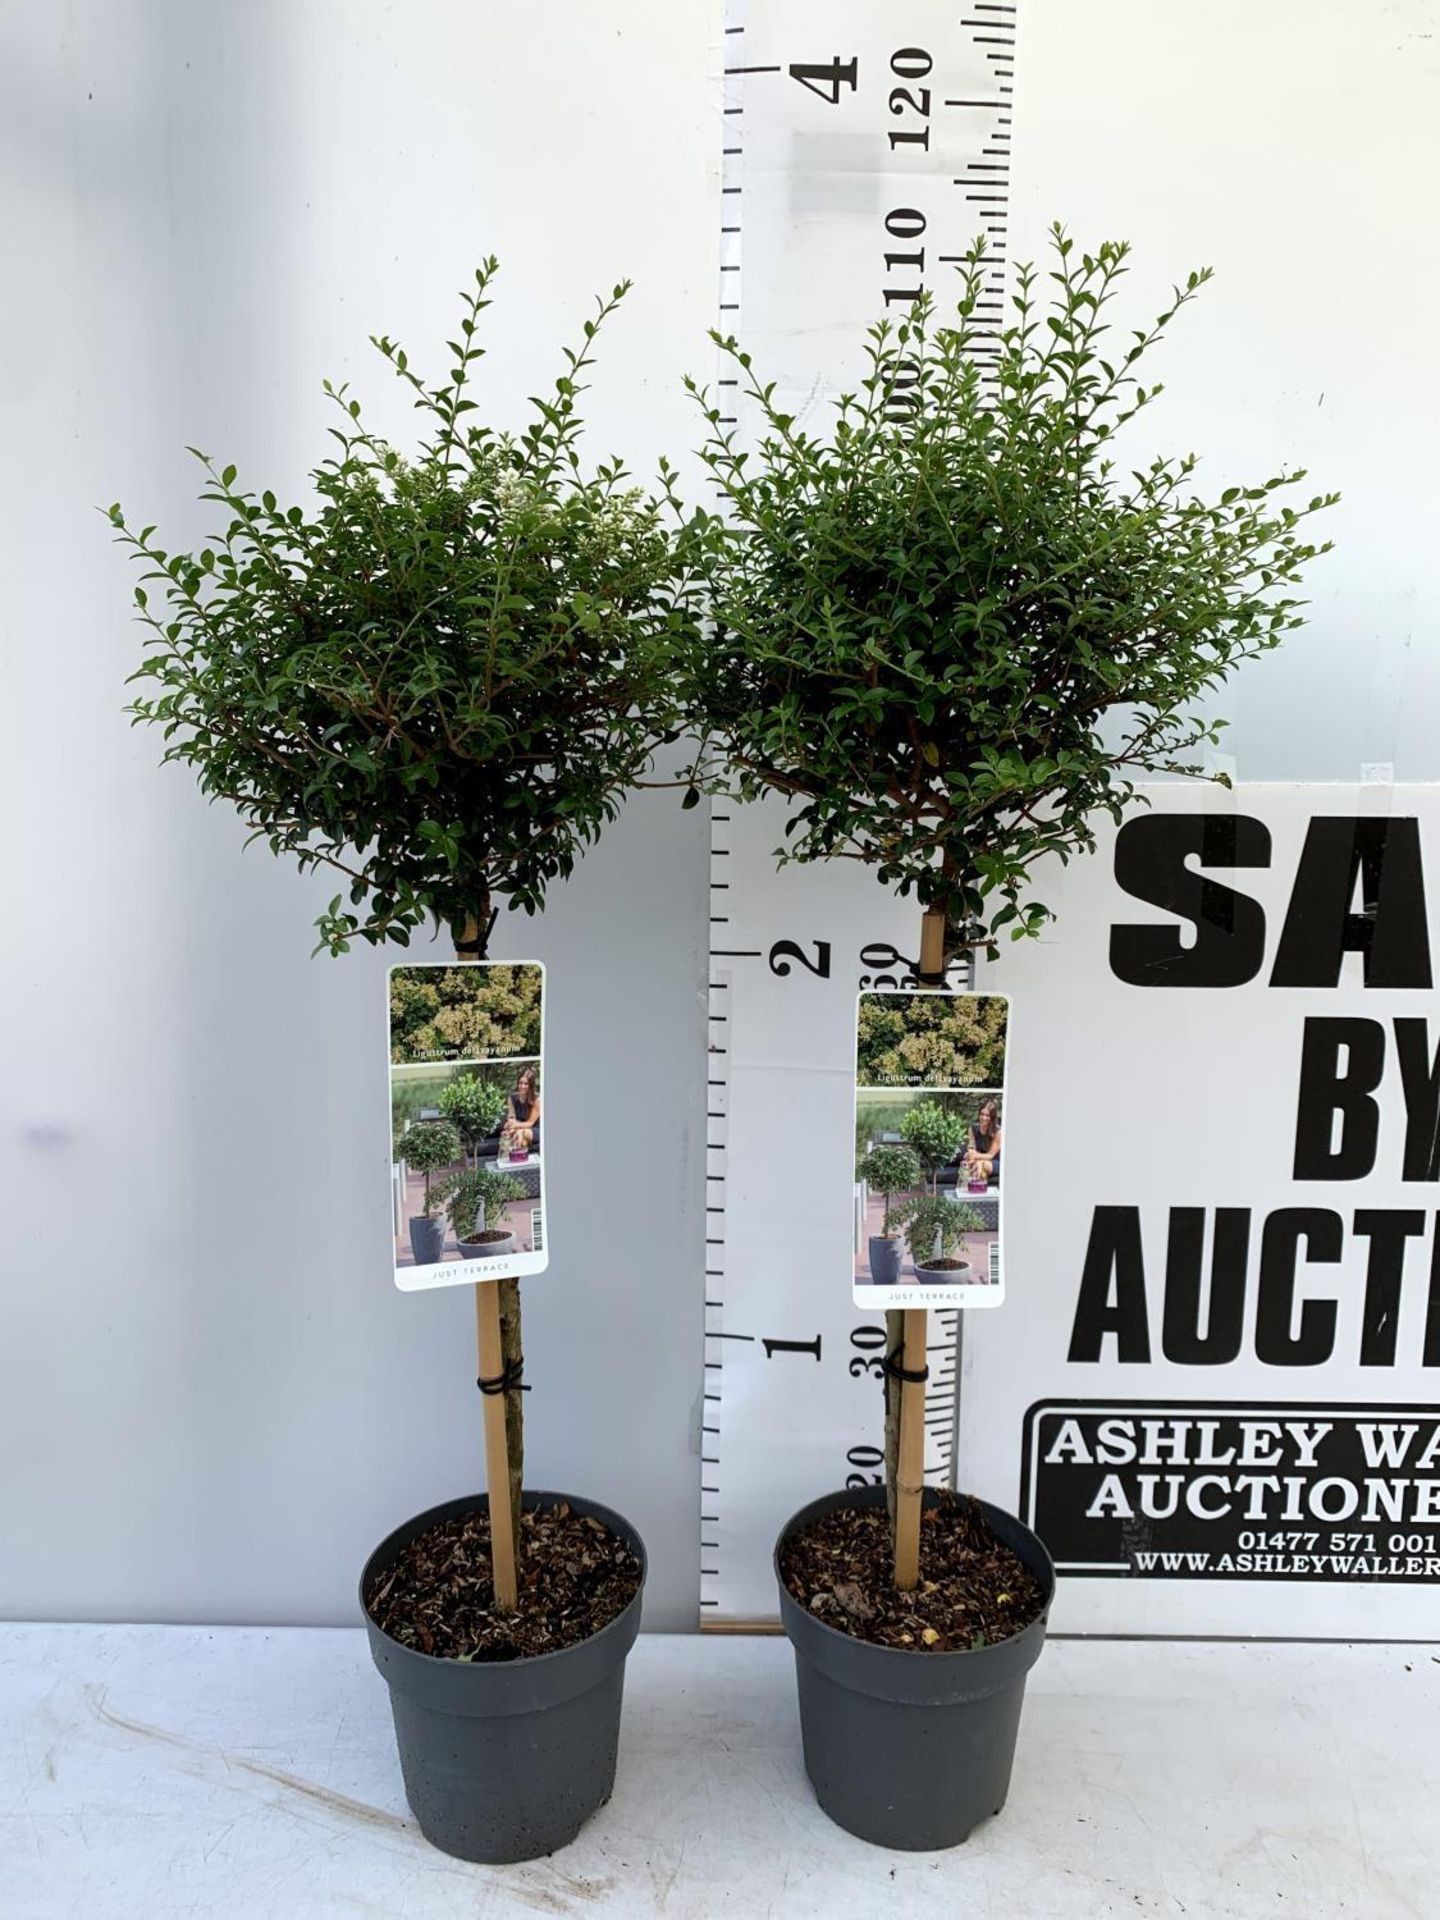 TWO LIGUSTRUM DELAVAYANUM STANDARD TREES APPROX 100CM IN HEIGHT IN 3LTR POTS PLUS VAT TO BE SOLD FOR - Image 2 of 8